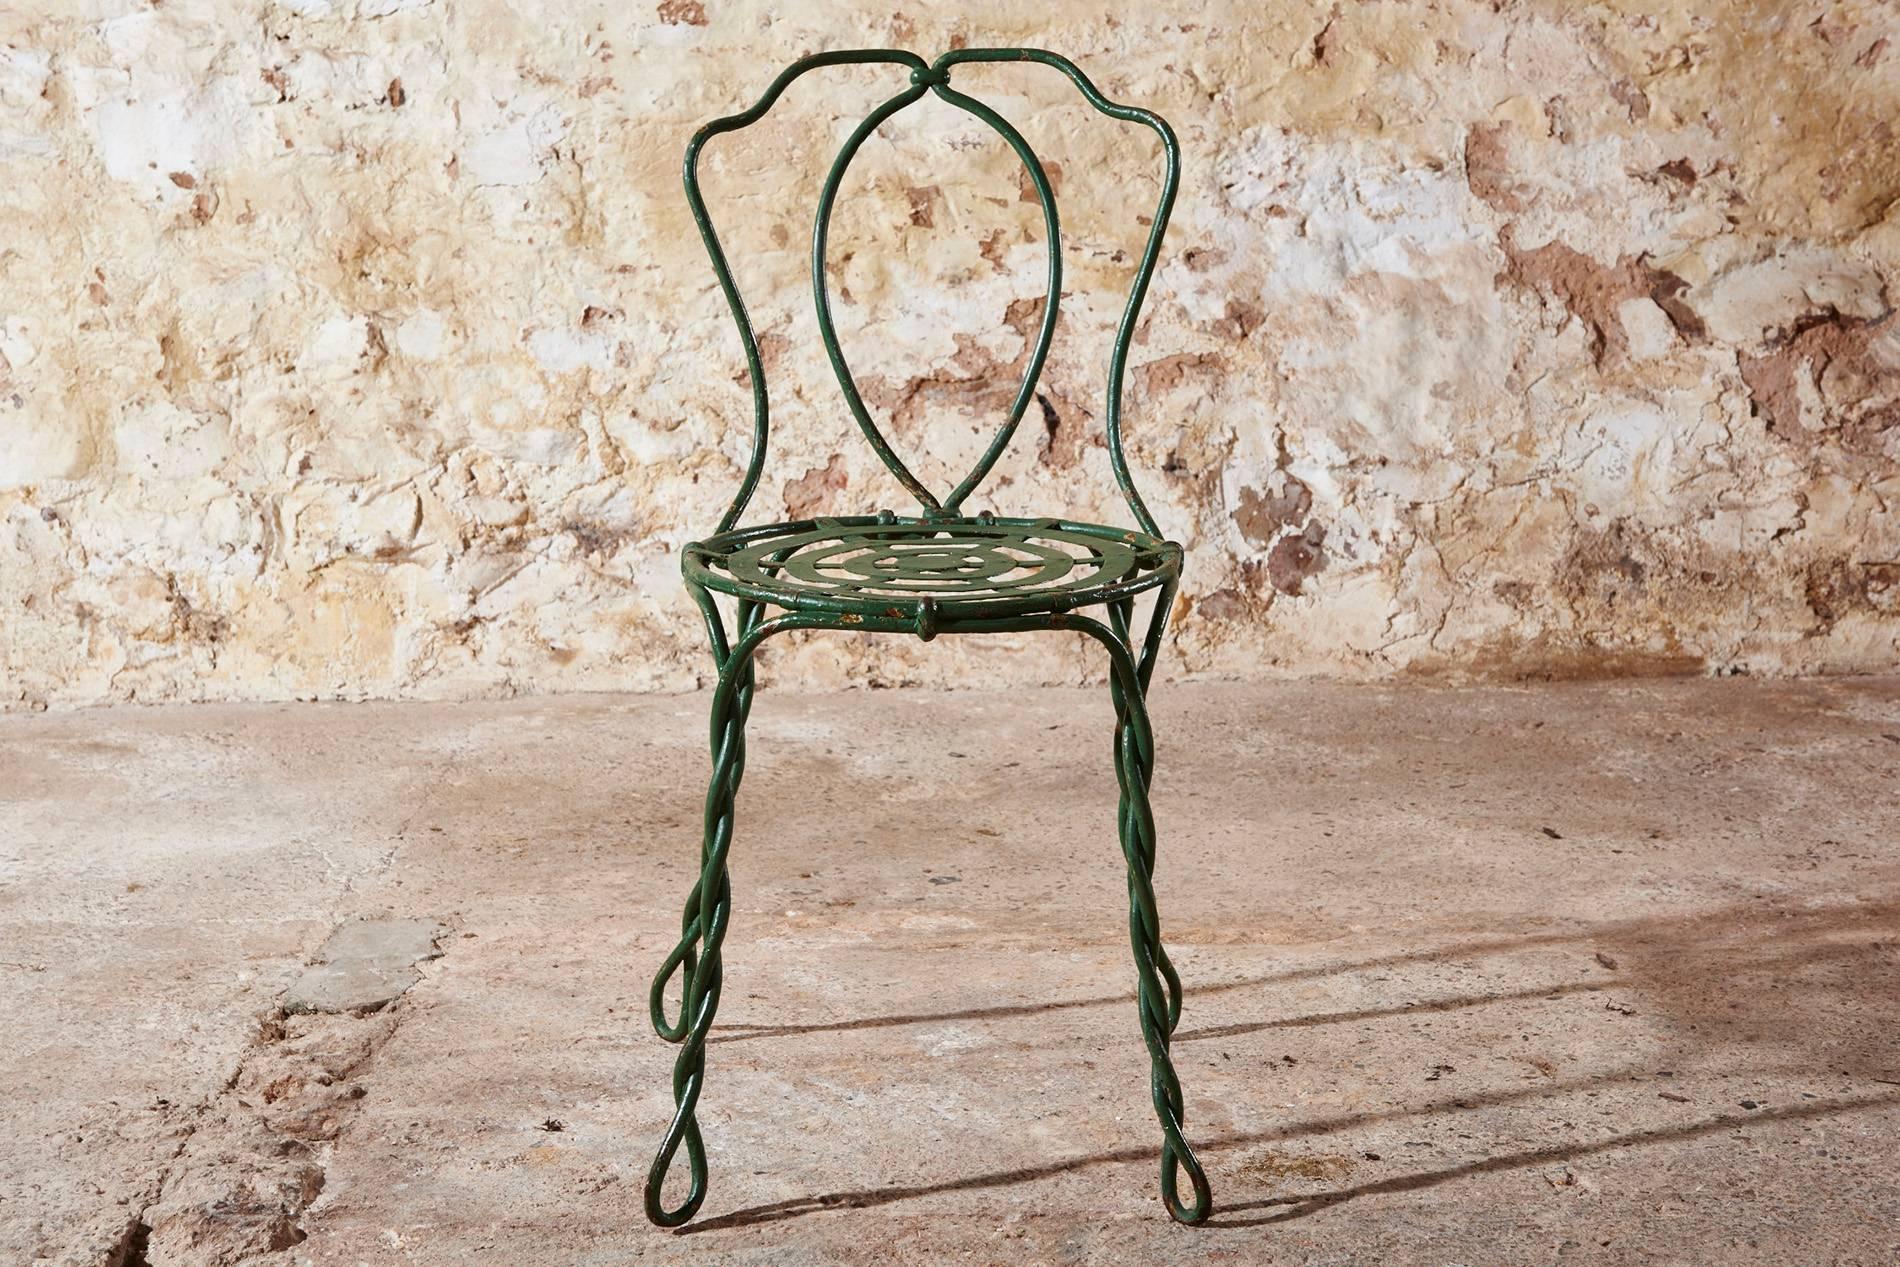 These fantastic and rare Vachon cafe chairs were made in mid-19th century in Paris. What makes them even rarer is that we have a set of six.

They have a rope style twisted wrought iron frame and a beautiful and original green patina.

These chairs